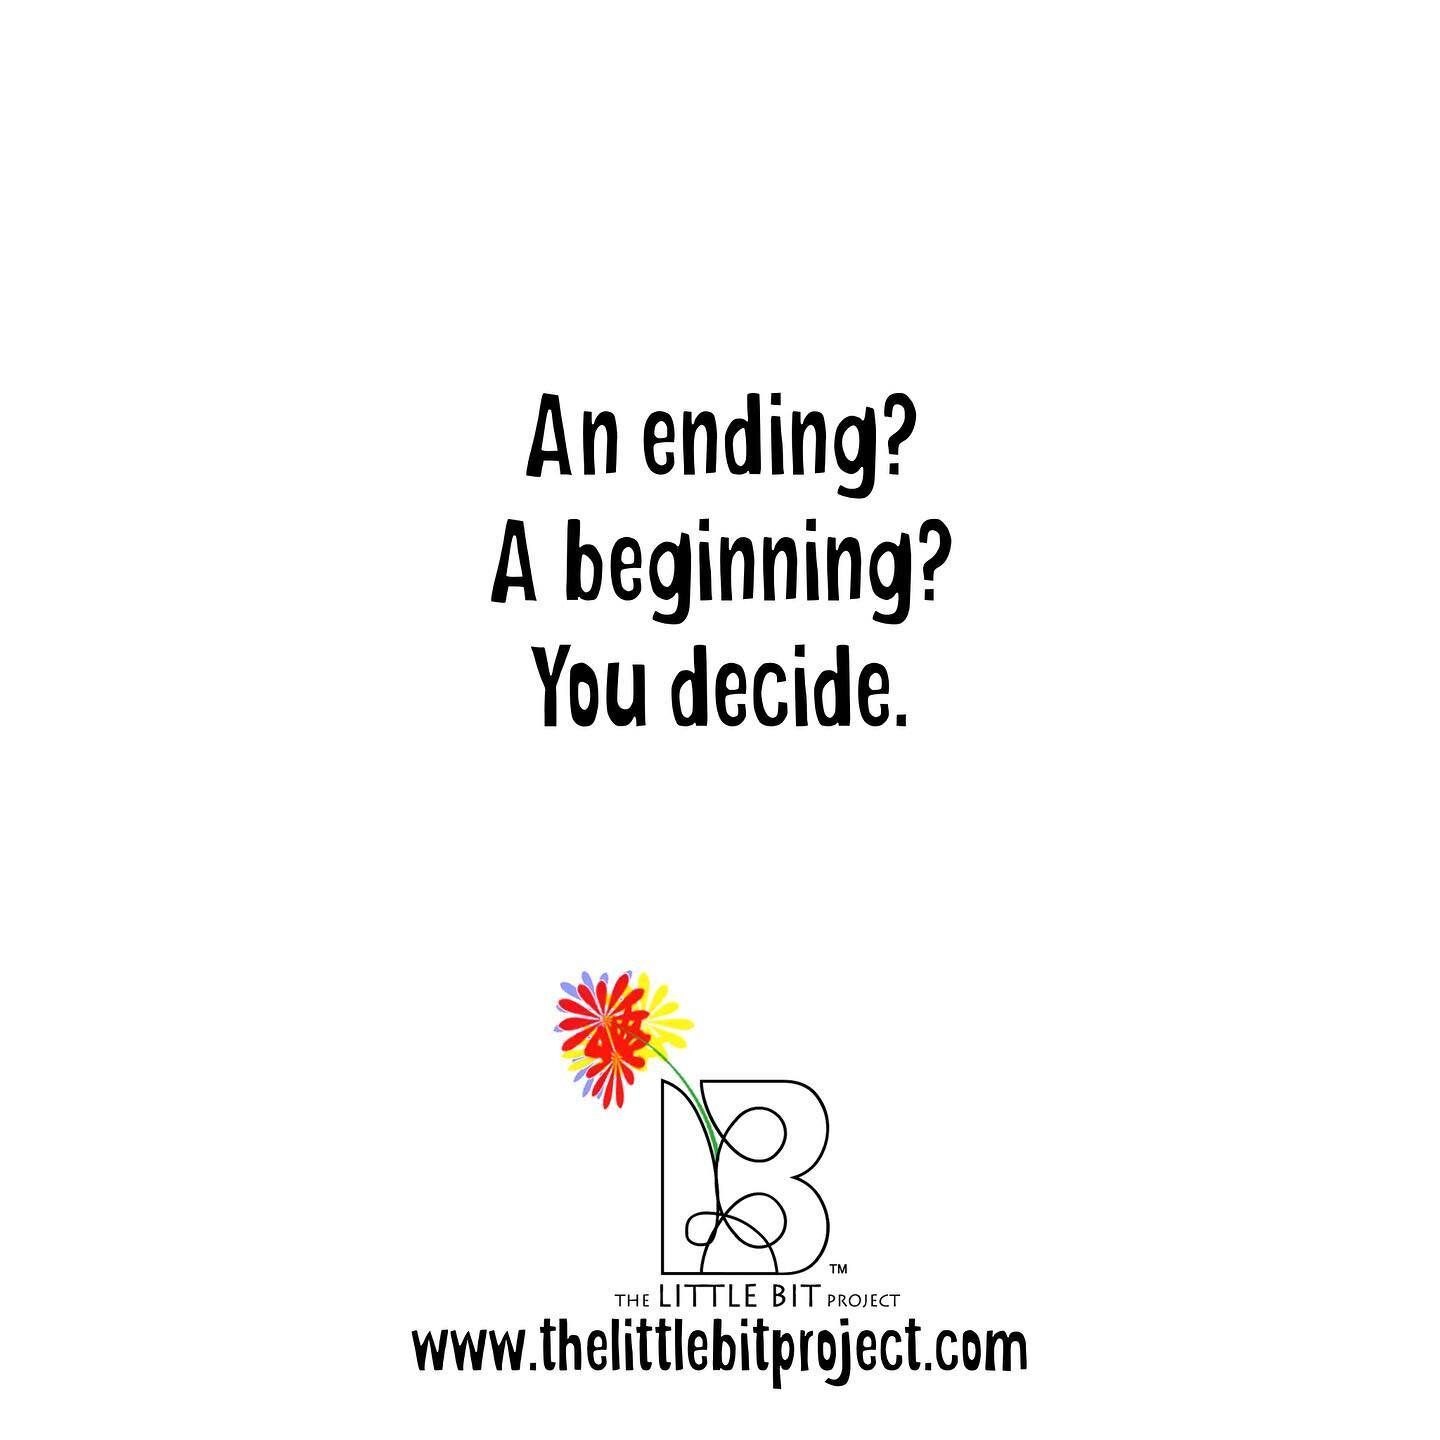 The choice is yours. SPOILER ALERT: there is no wrong answer. 😔 

#thelittlebitproject #youdecide #endingsarenewbeginnings #beginagain #freshstart #secondtimearound #perception #mindset #reframe